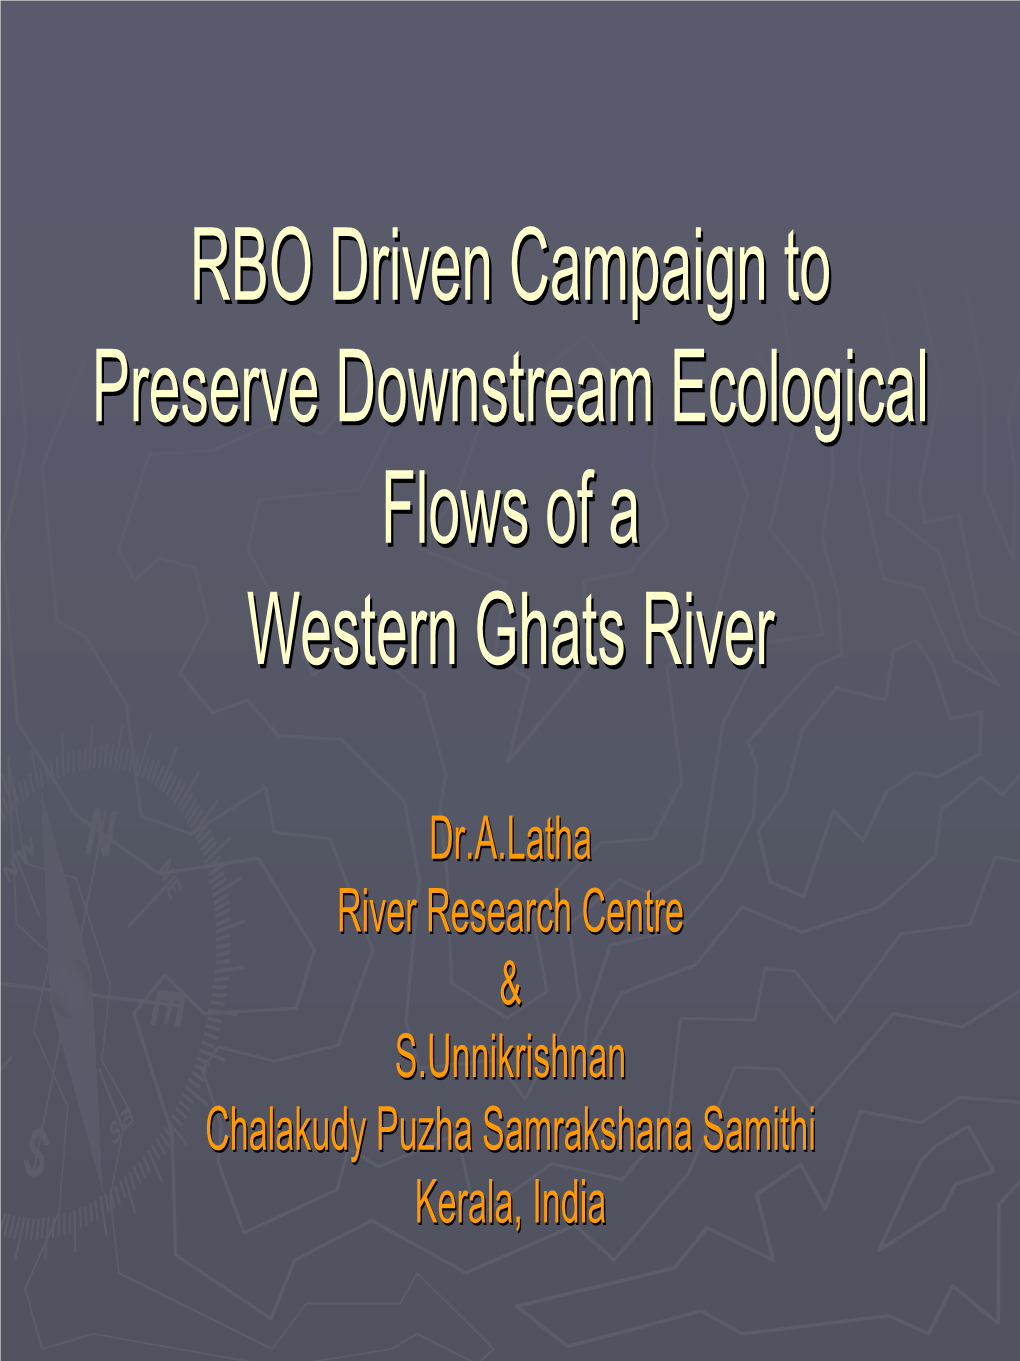 RBO Driven Campaign to Preserve Downstream Ecological Flows of a Western Ghats River